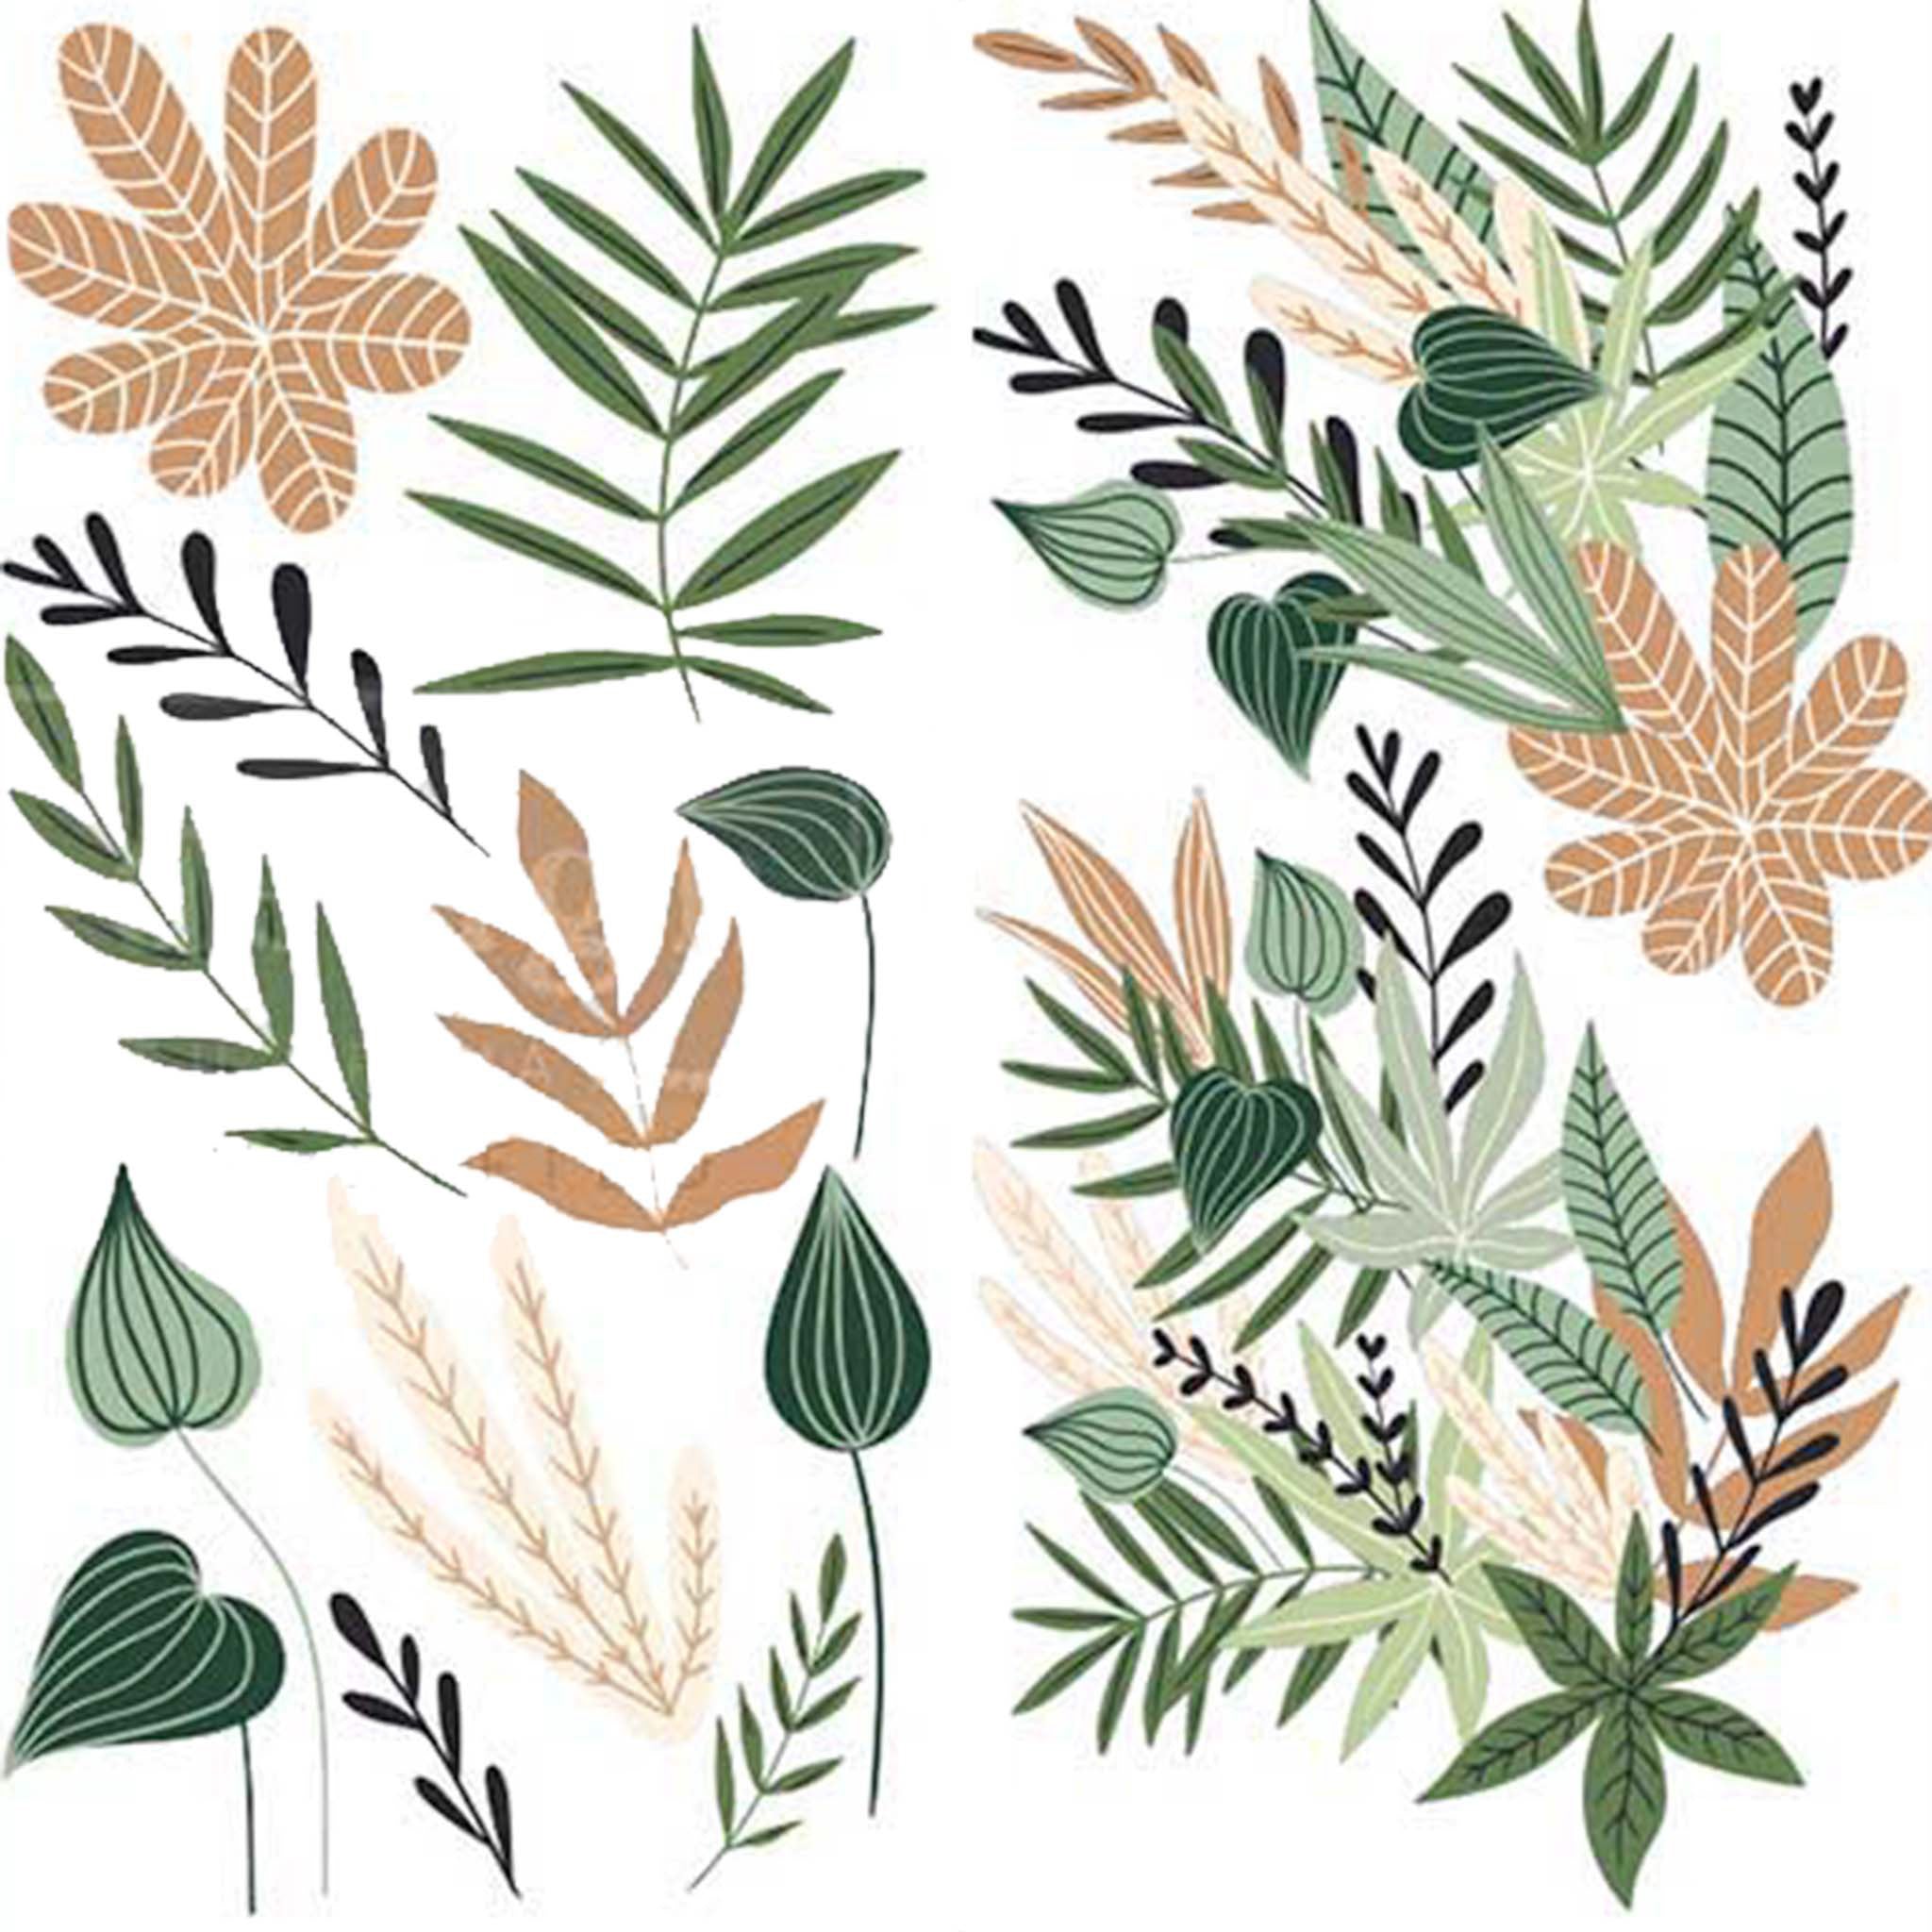 Small rub-on transfer design of hand painted green and tan foliage and leaves.